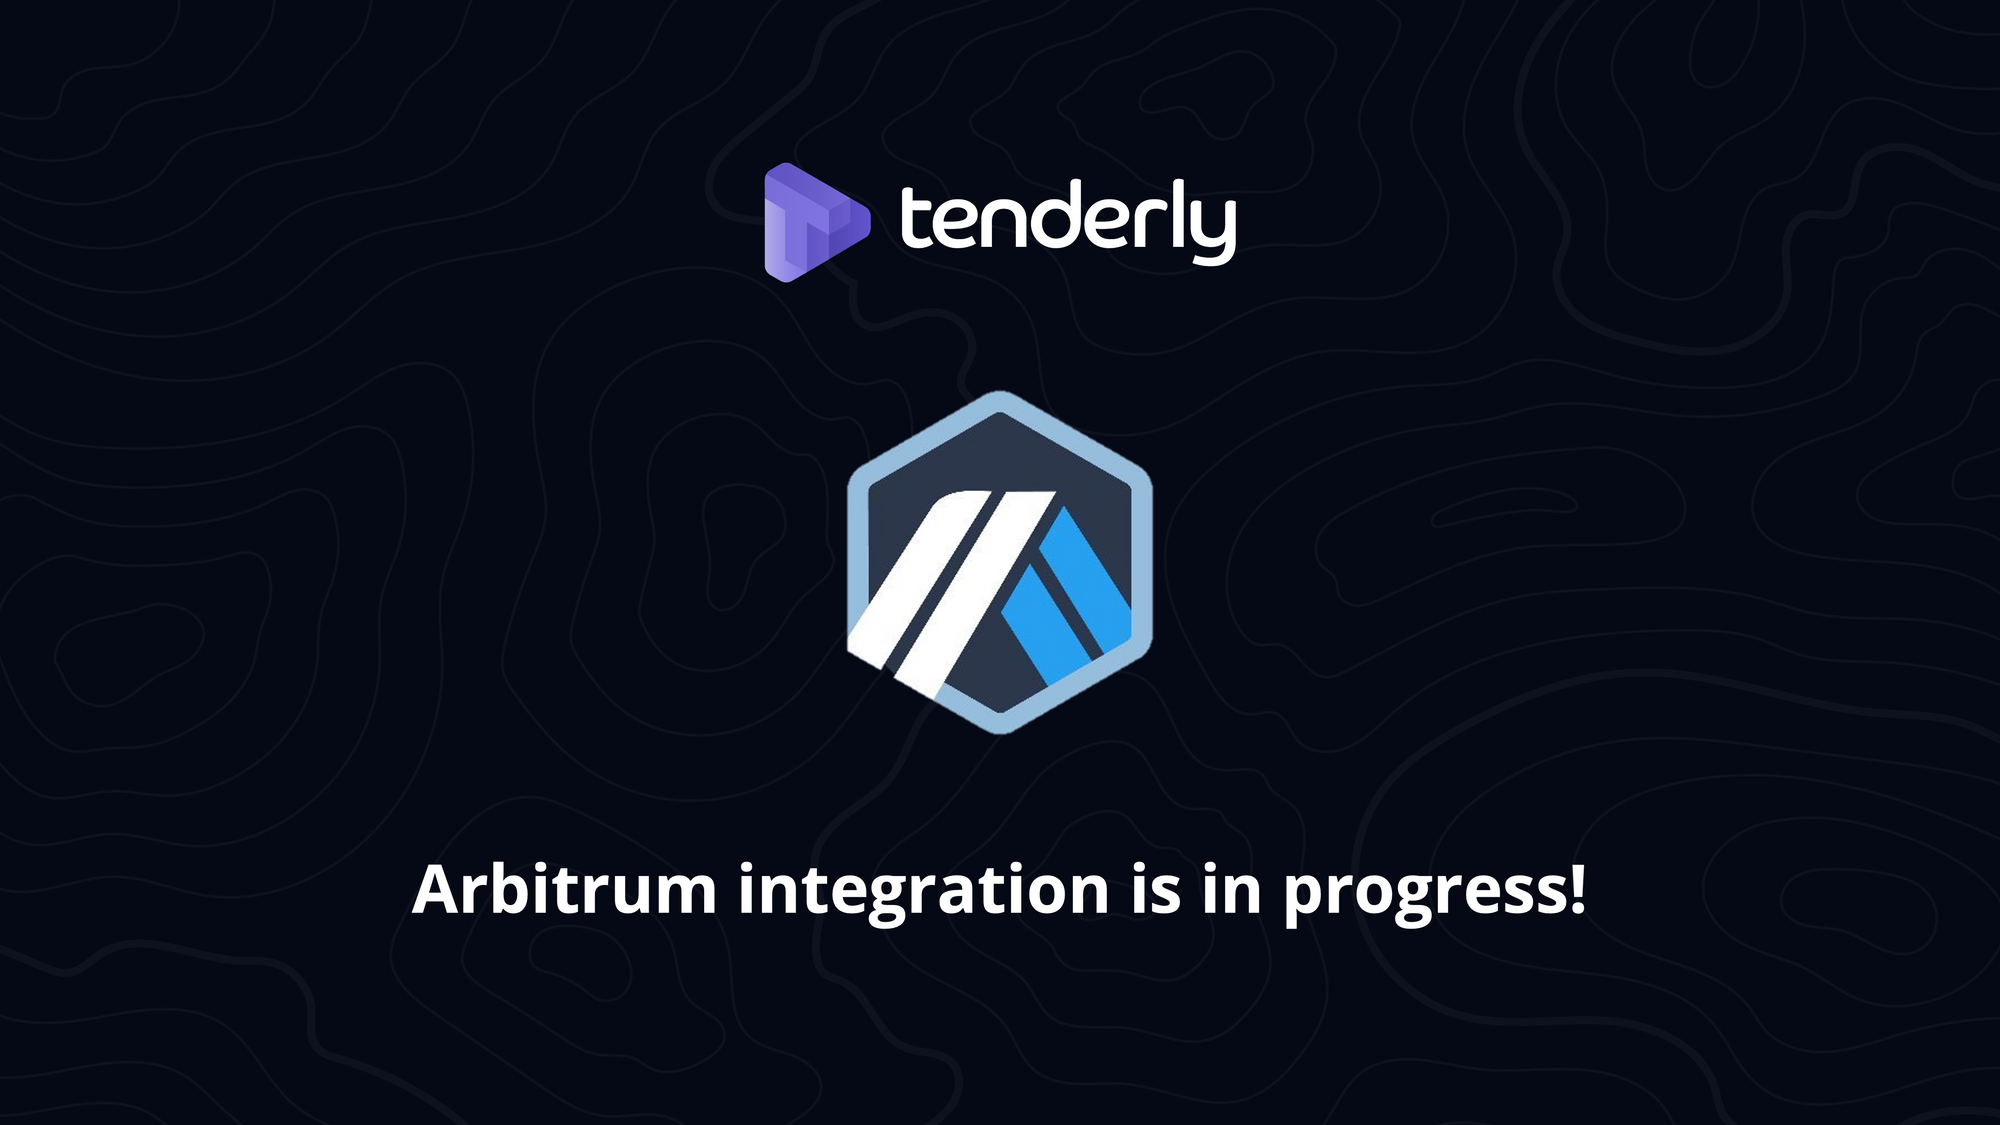 You can now use Arbitrum on Tenderly!